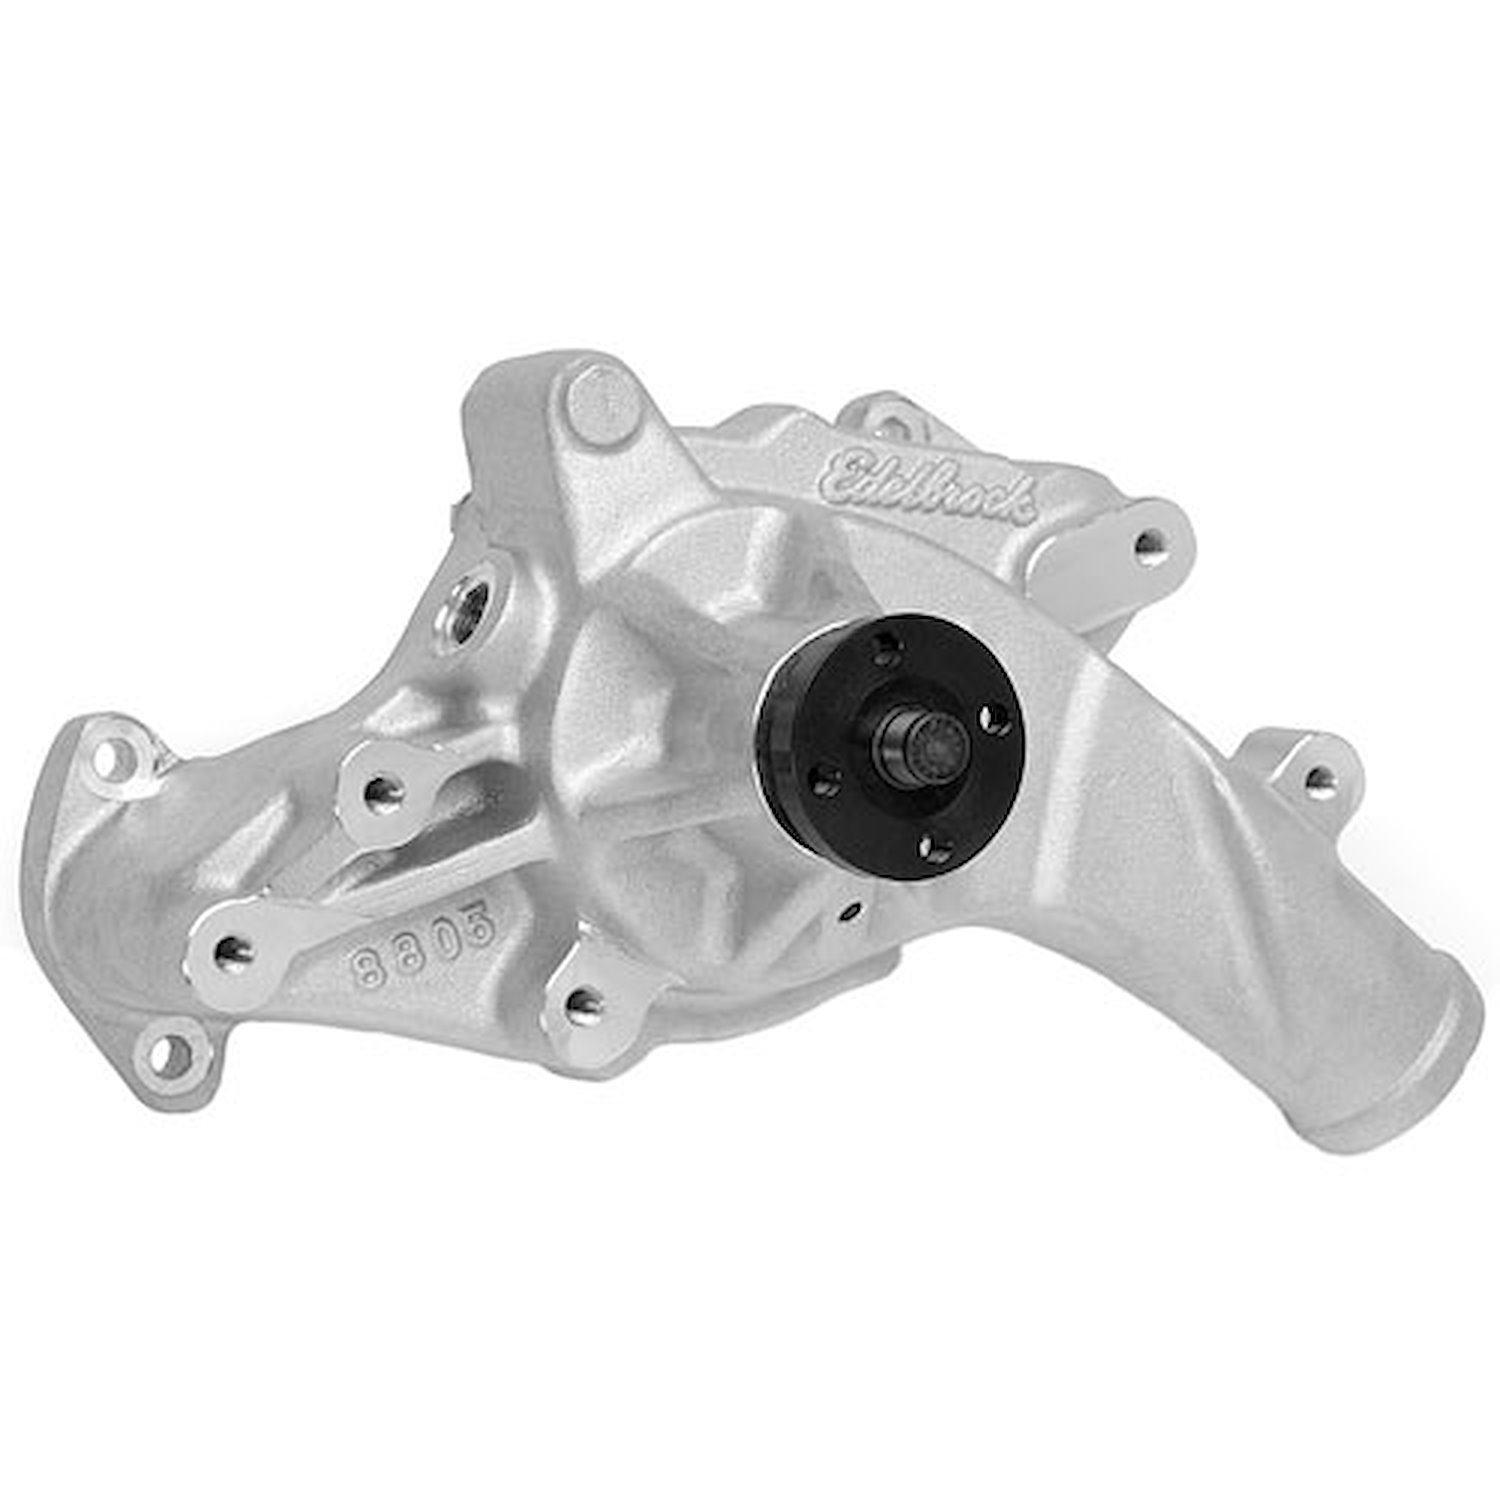 Victor Series Satin Aluminum Water Pump for 1965-1976 Ford FE Engines